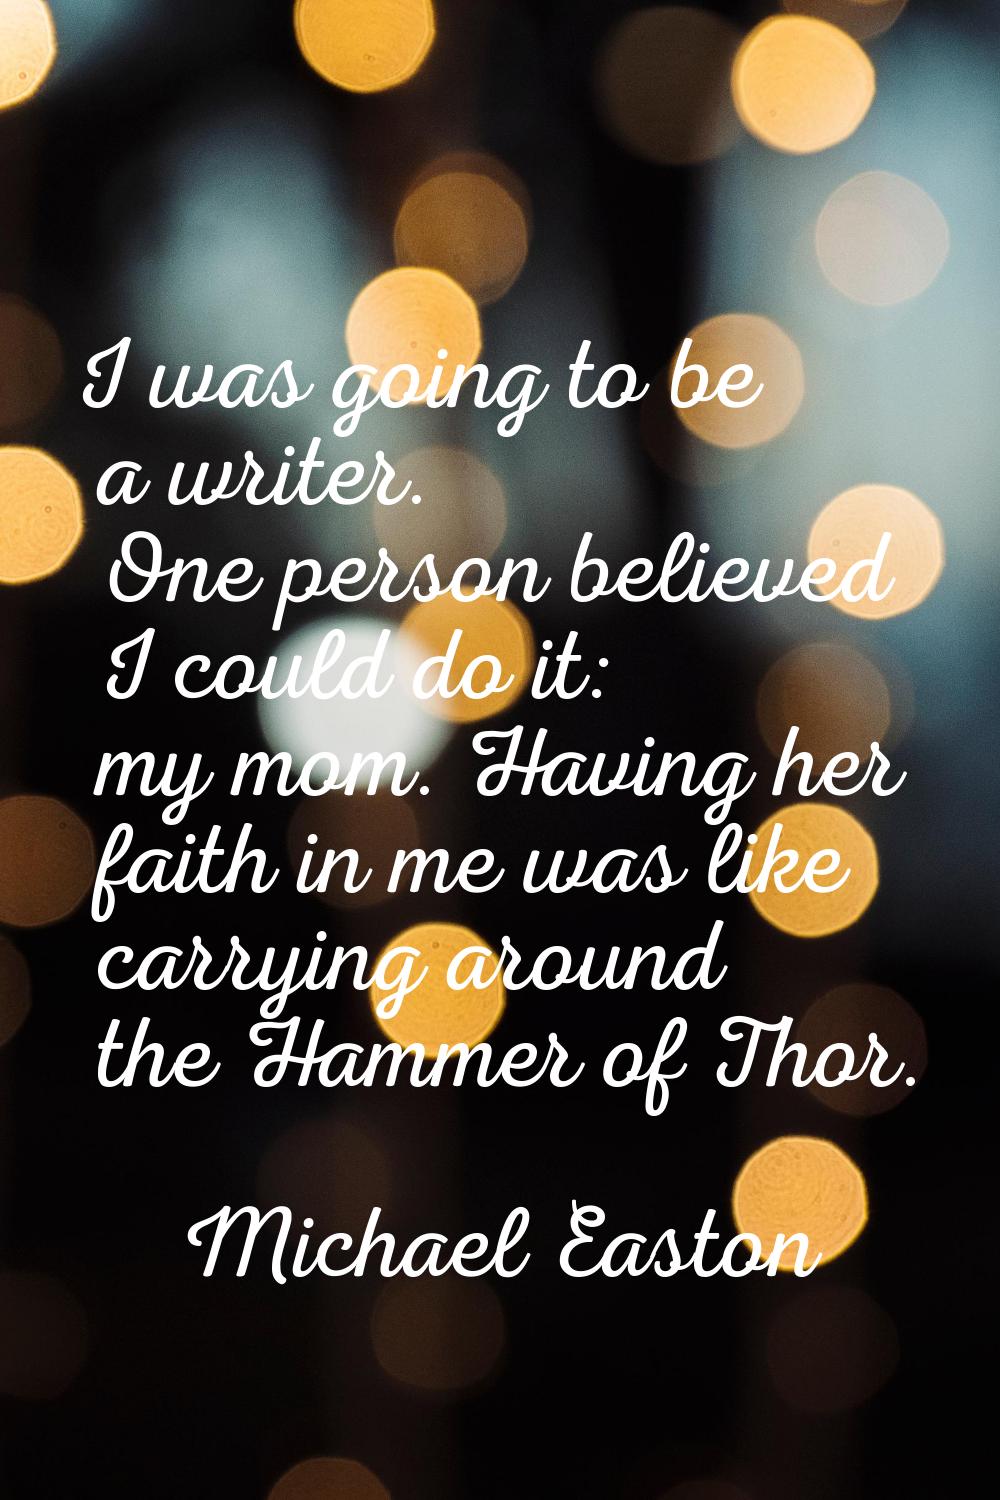 I was going to be a writer. One person believed I could do it: my mom. Having her faith in me was l